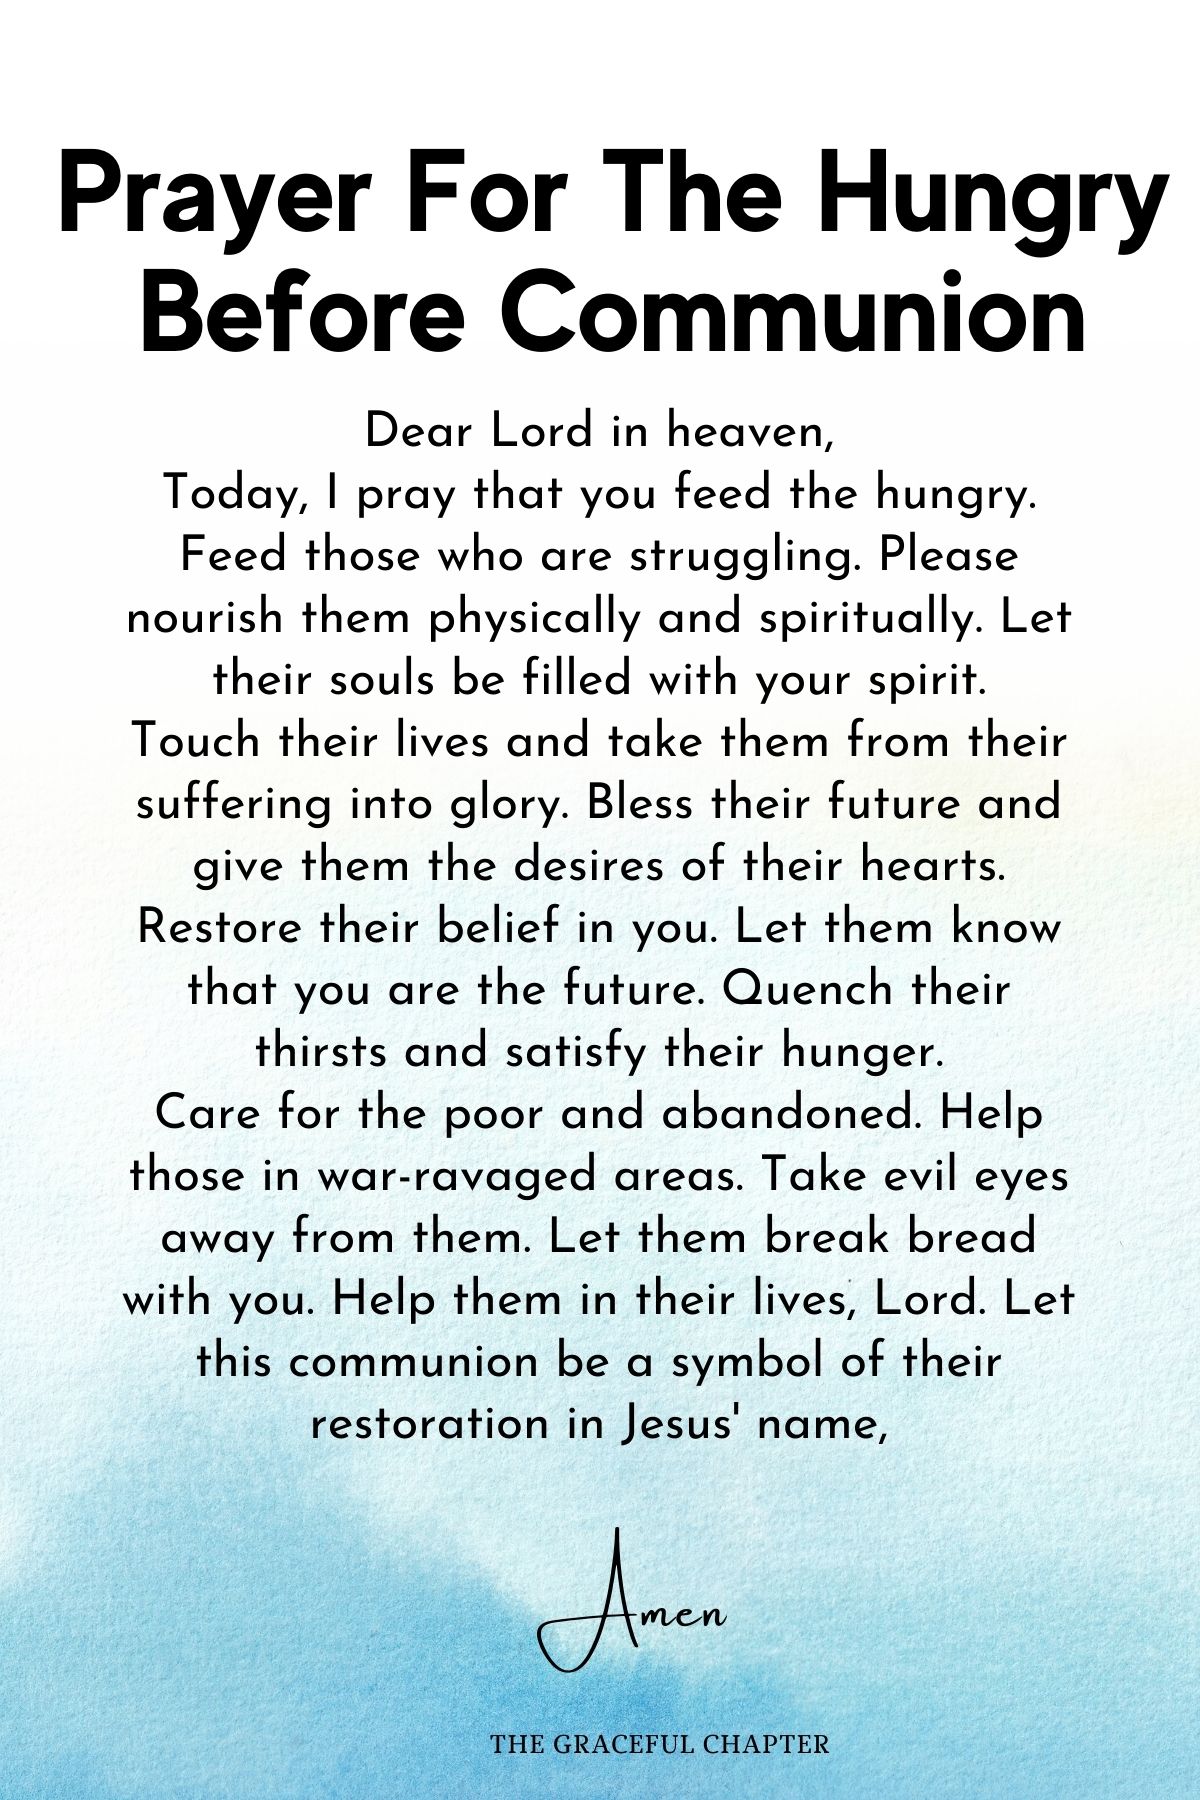 Prayer for the hungry before communion